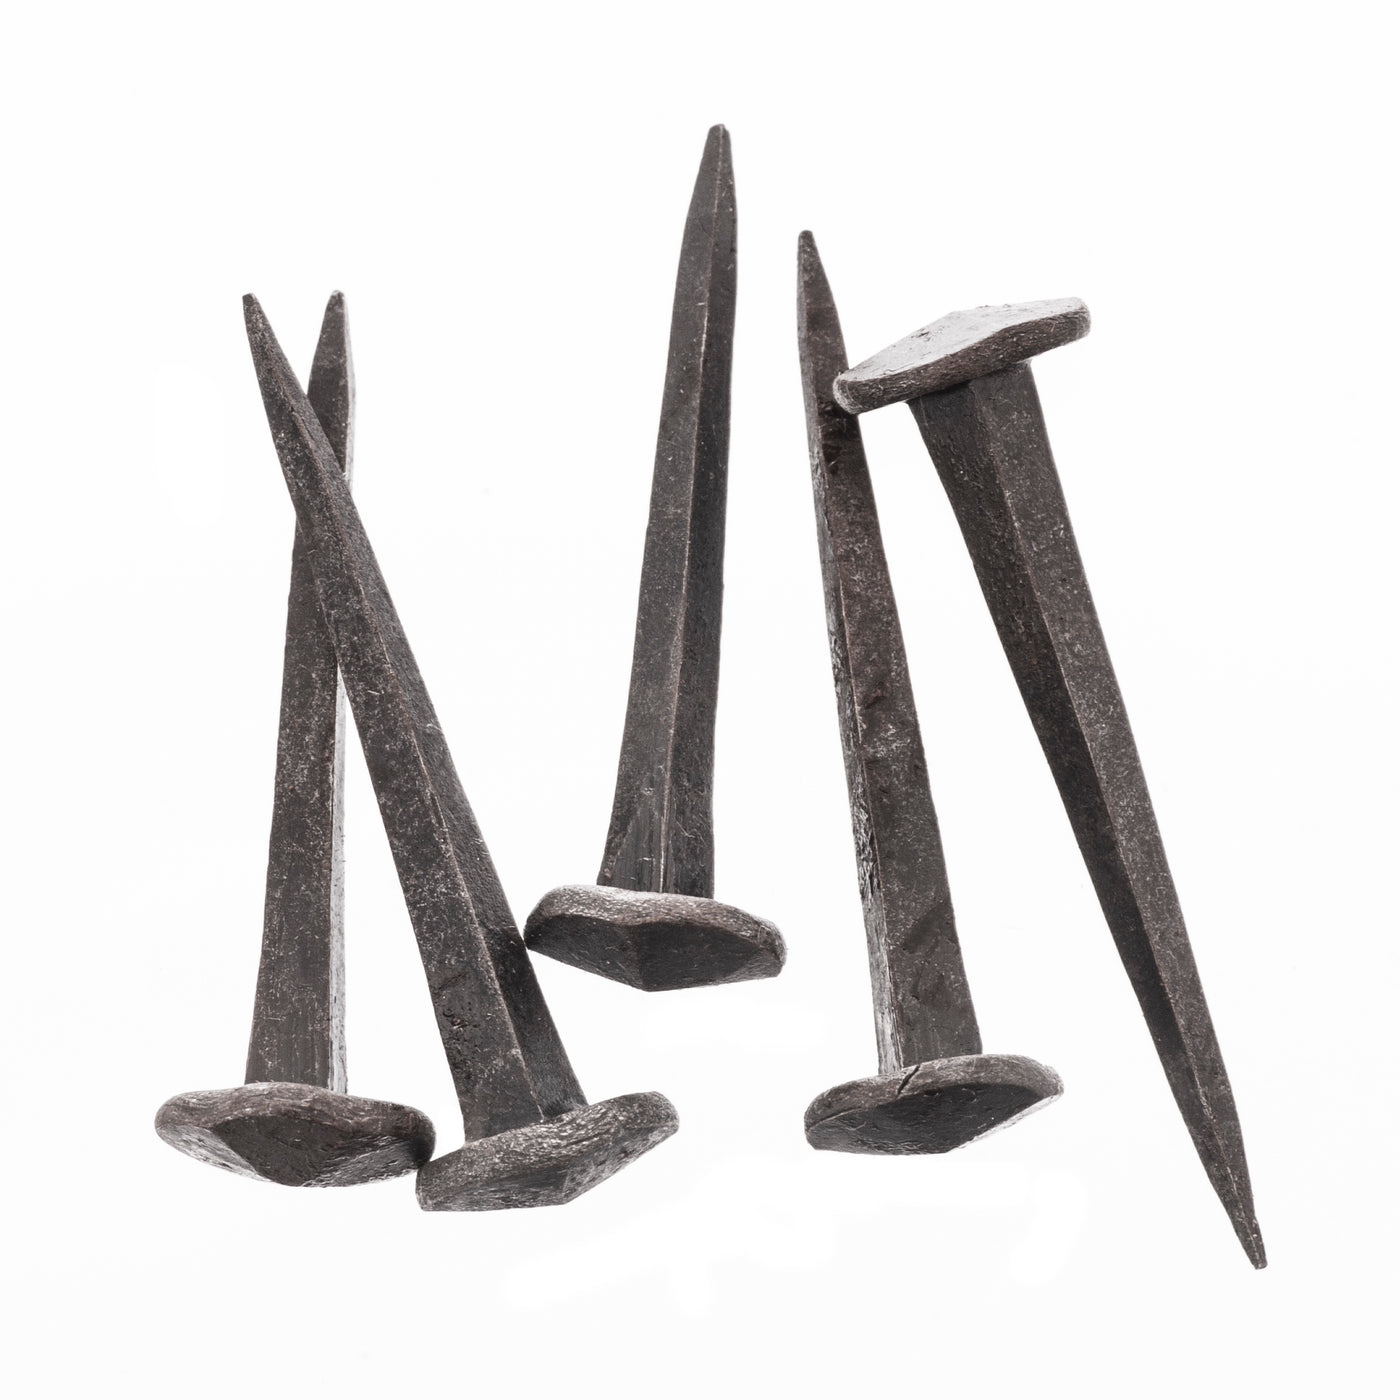 Accessories - Forged Iron Nails - Grimfrost.com